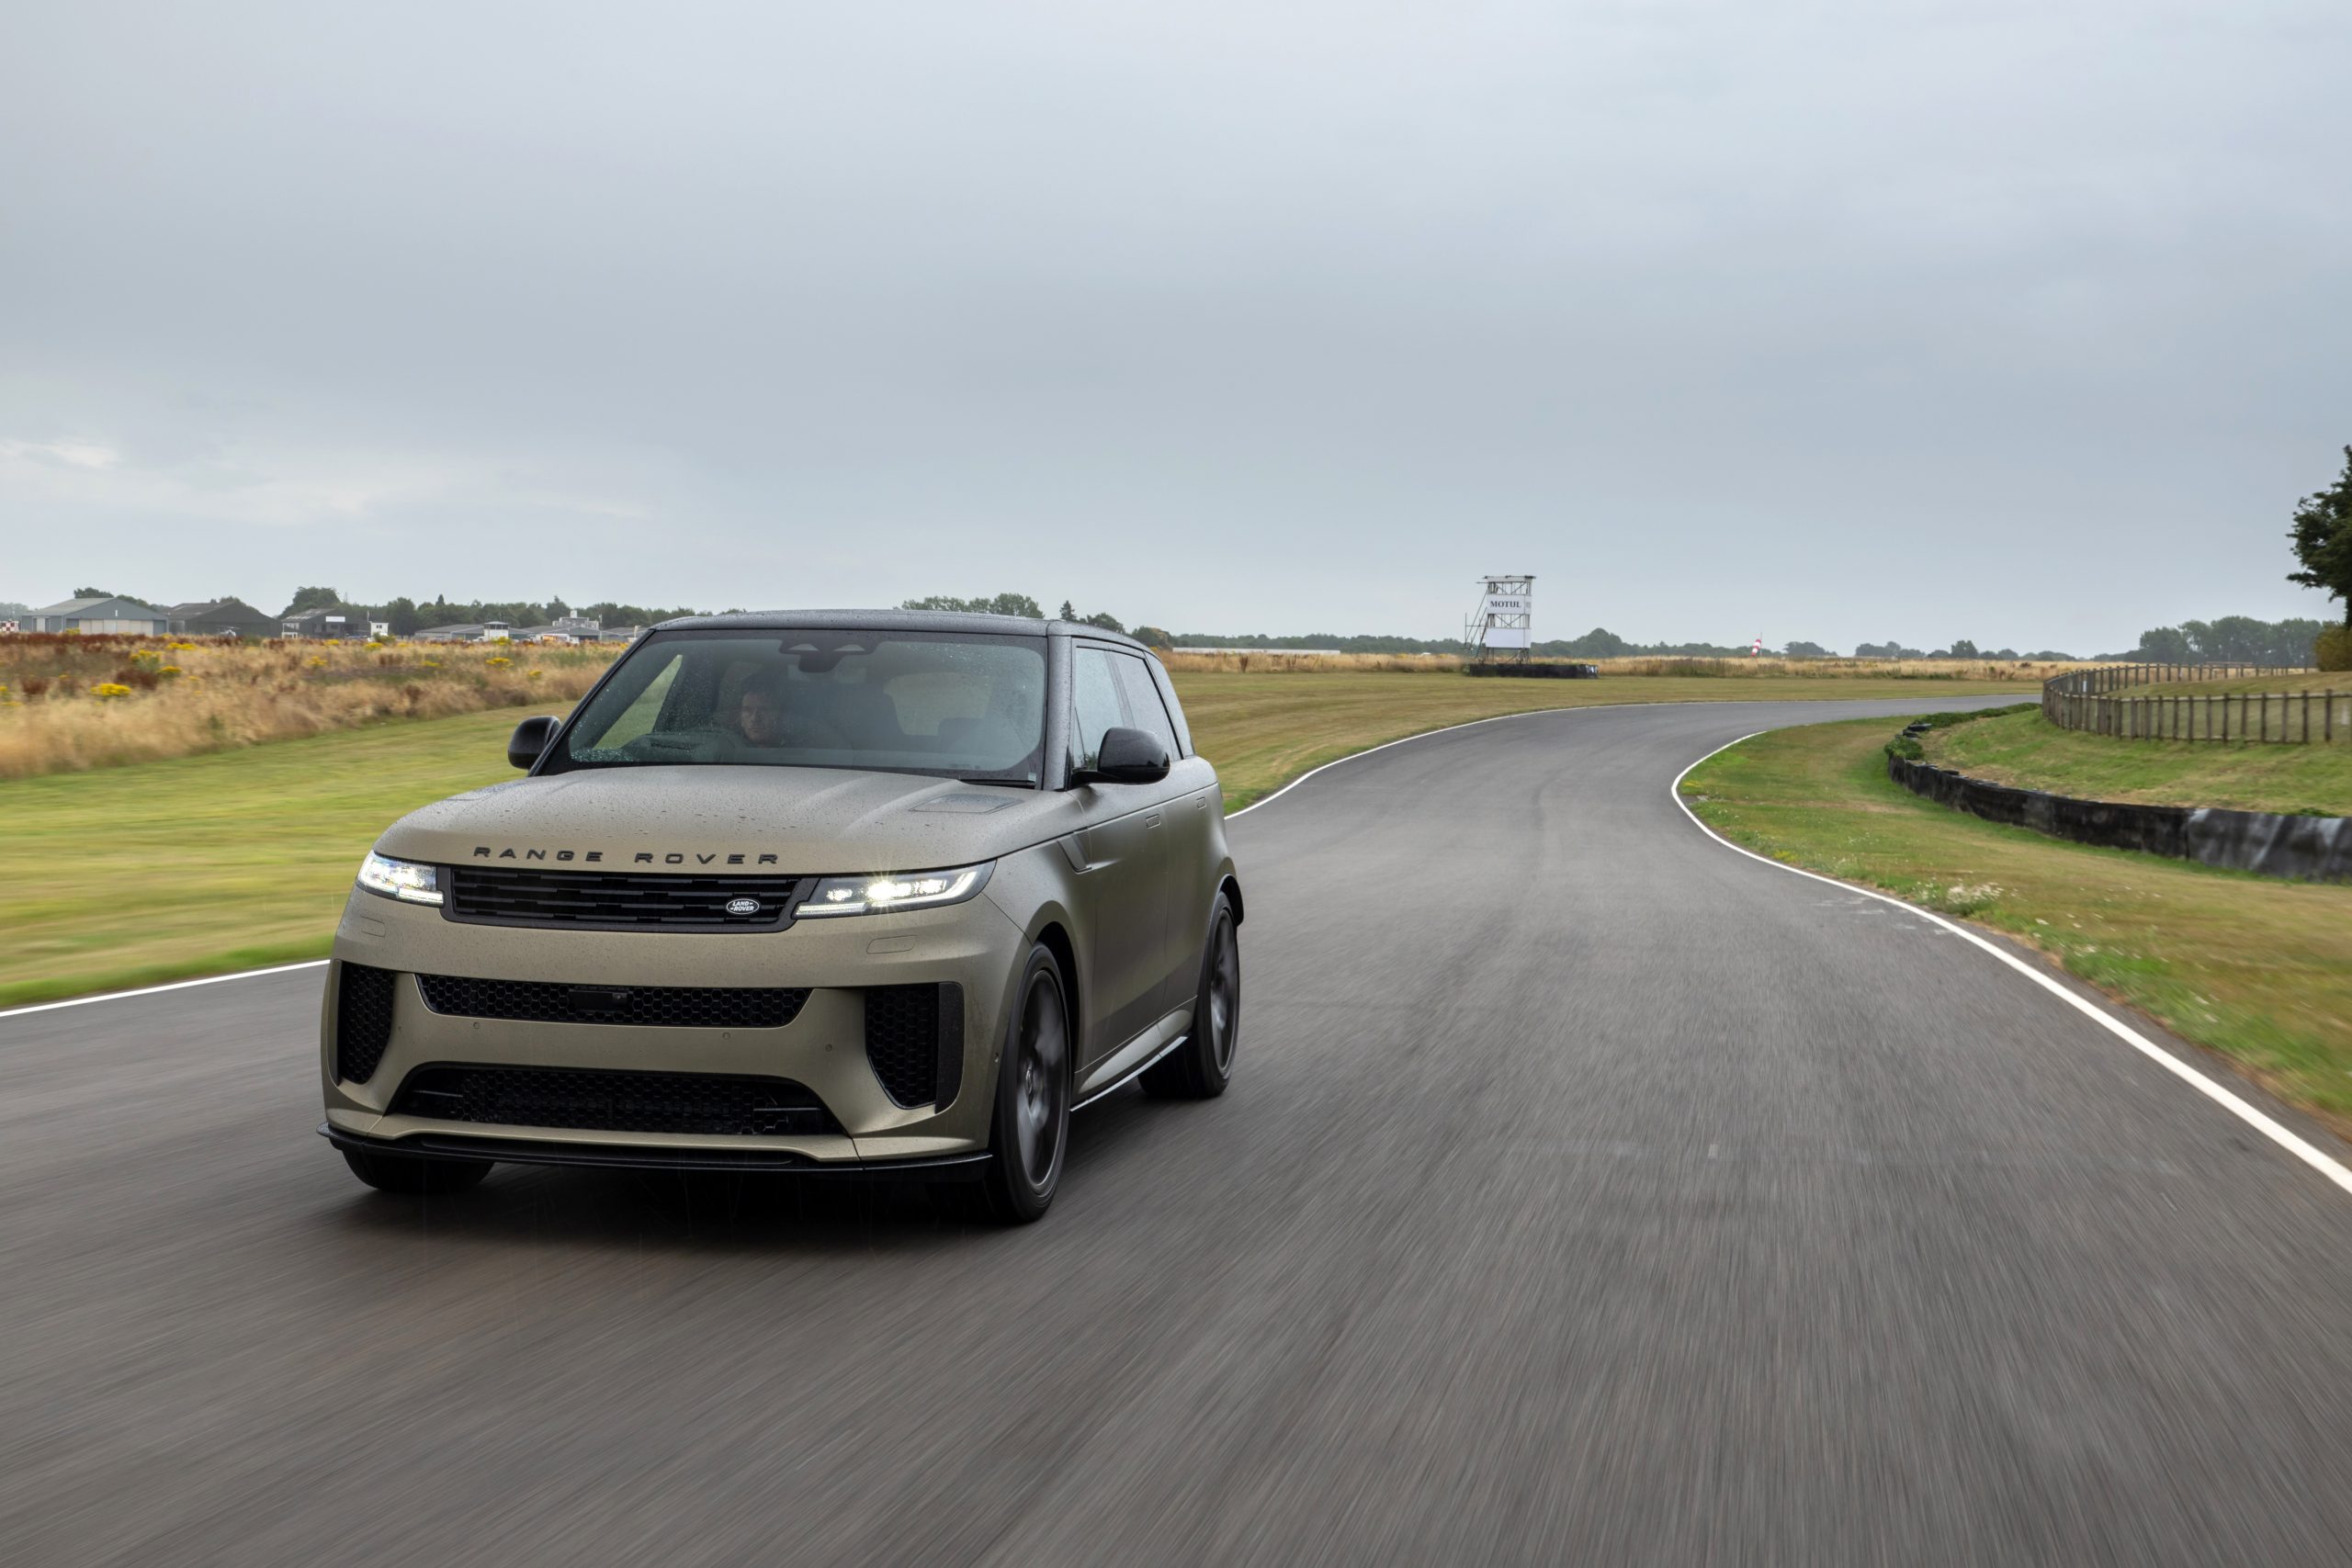 Riding in a new Range Rover Sport SV around Goodwood track - Magneto